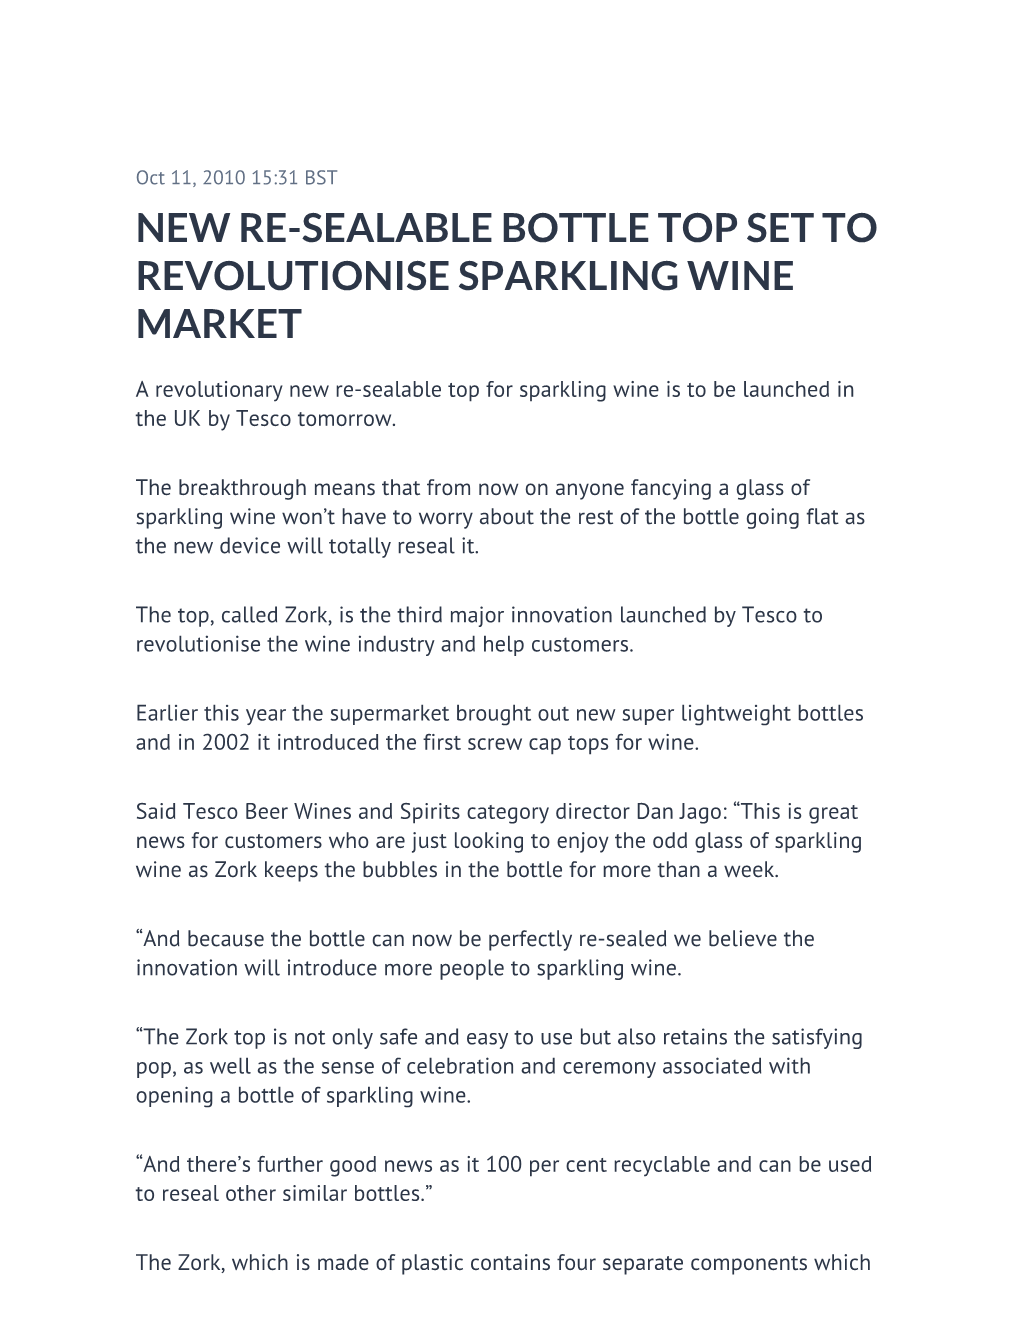 New Re-Sealable Bottle Top Set to Revolutionise Sparkling Wine Market